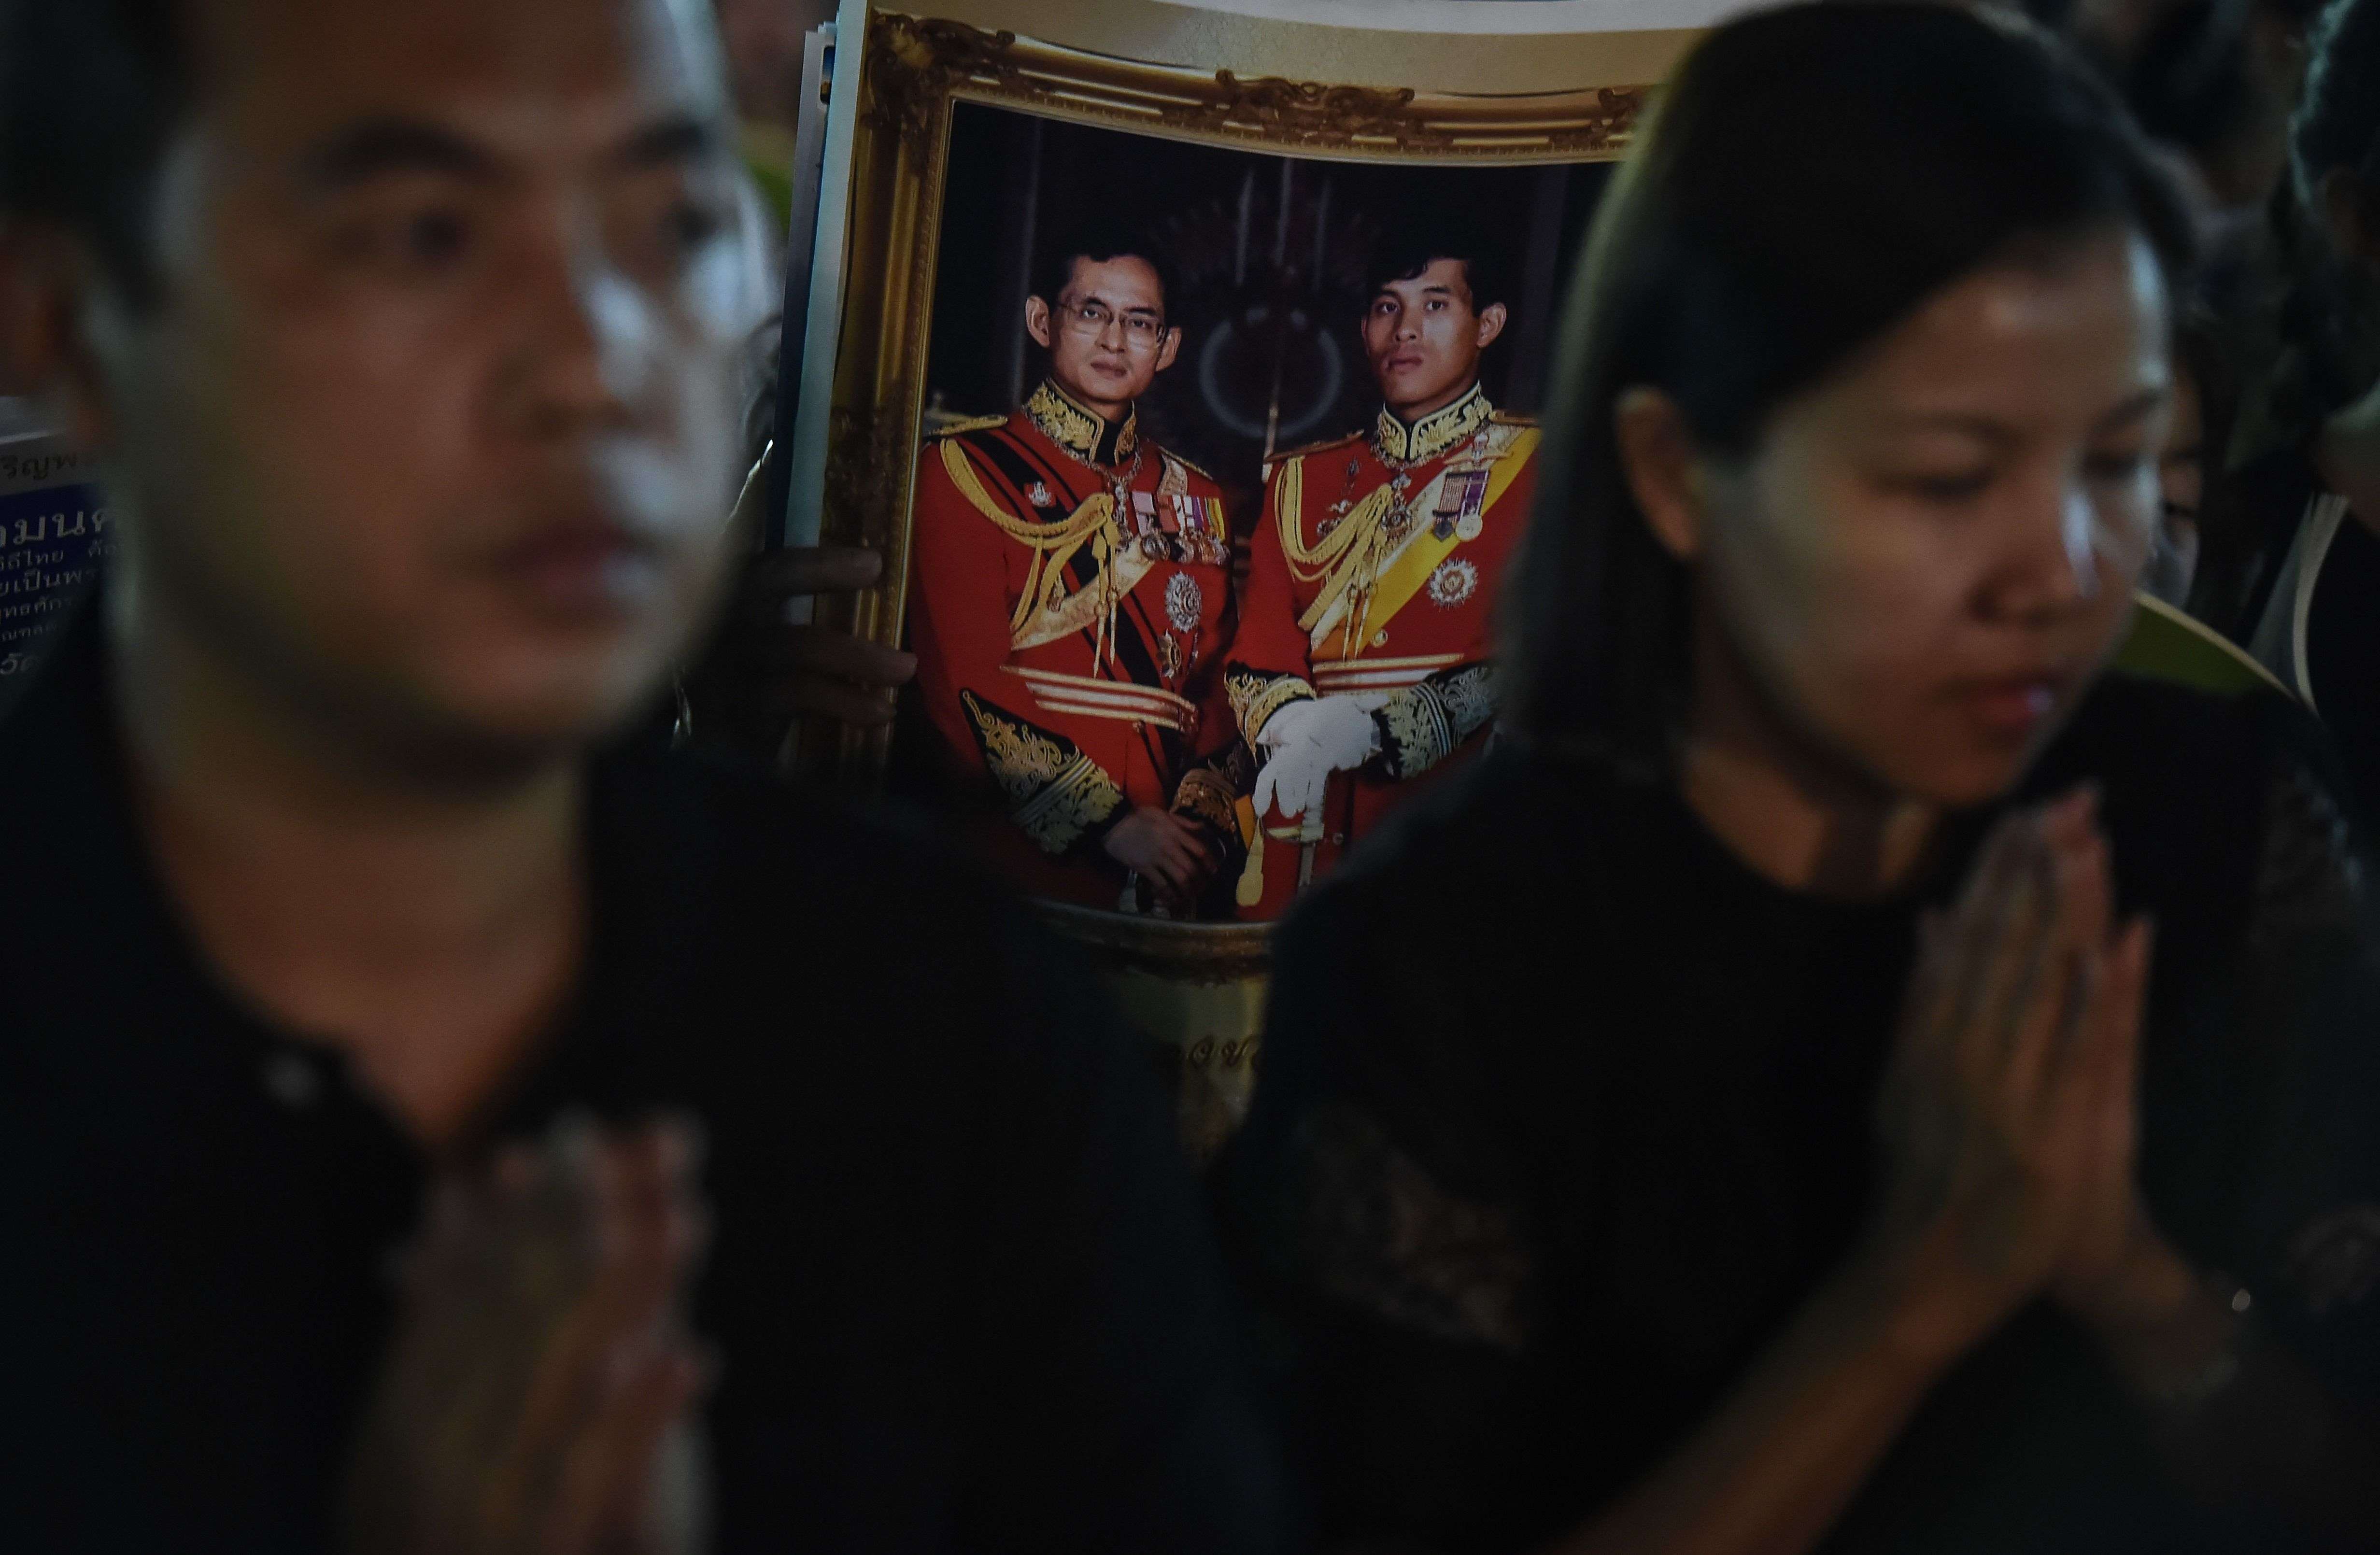 Thailand has strict laws against insulting the royal family. Photo: AFP